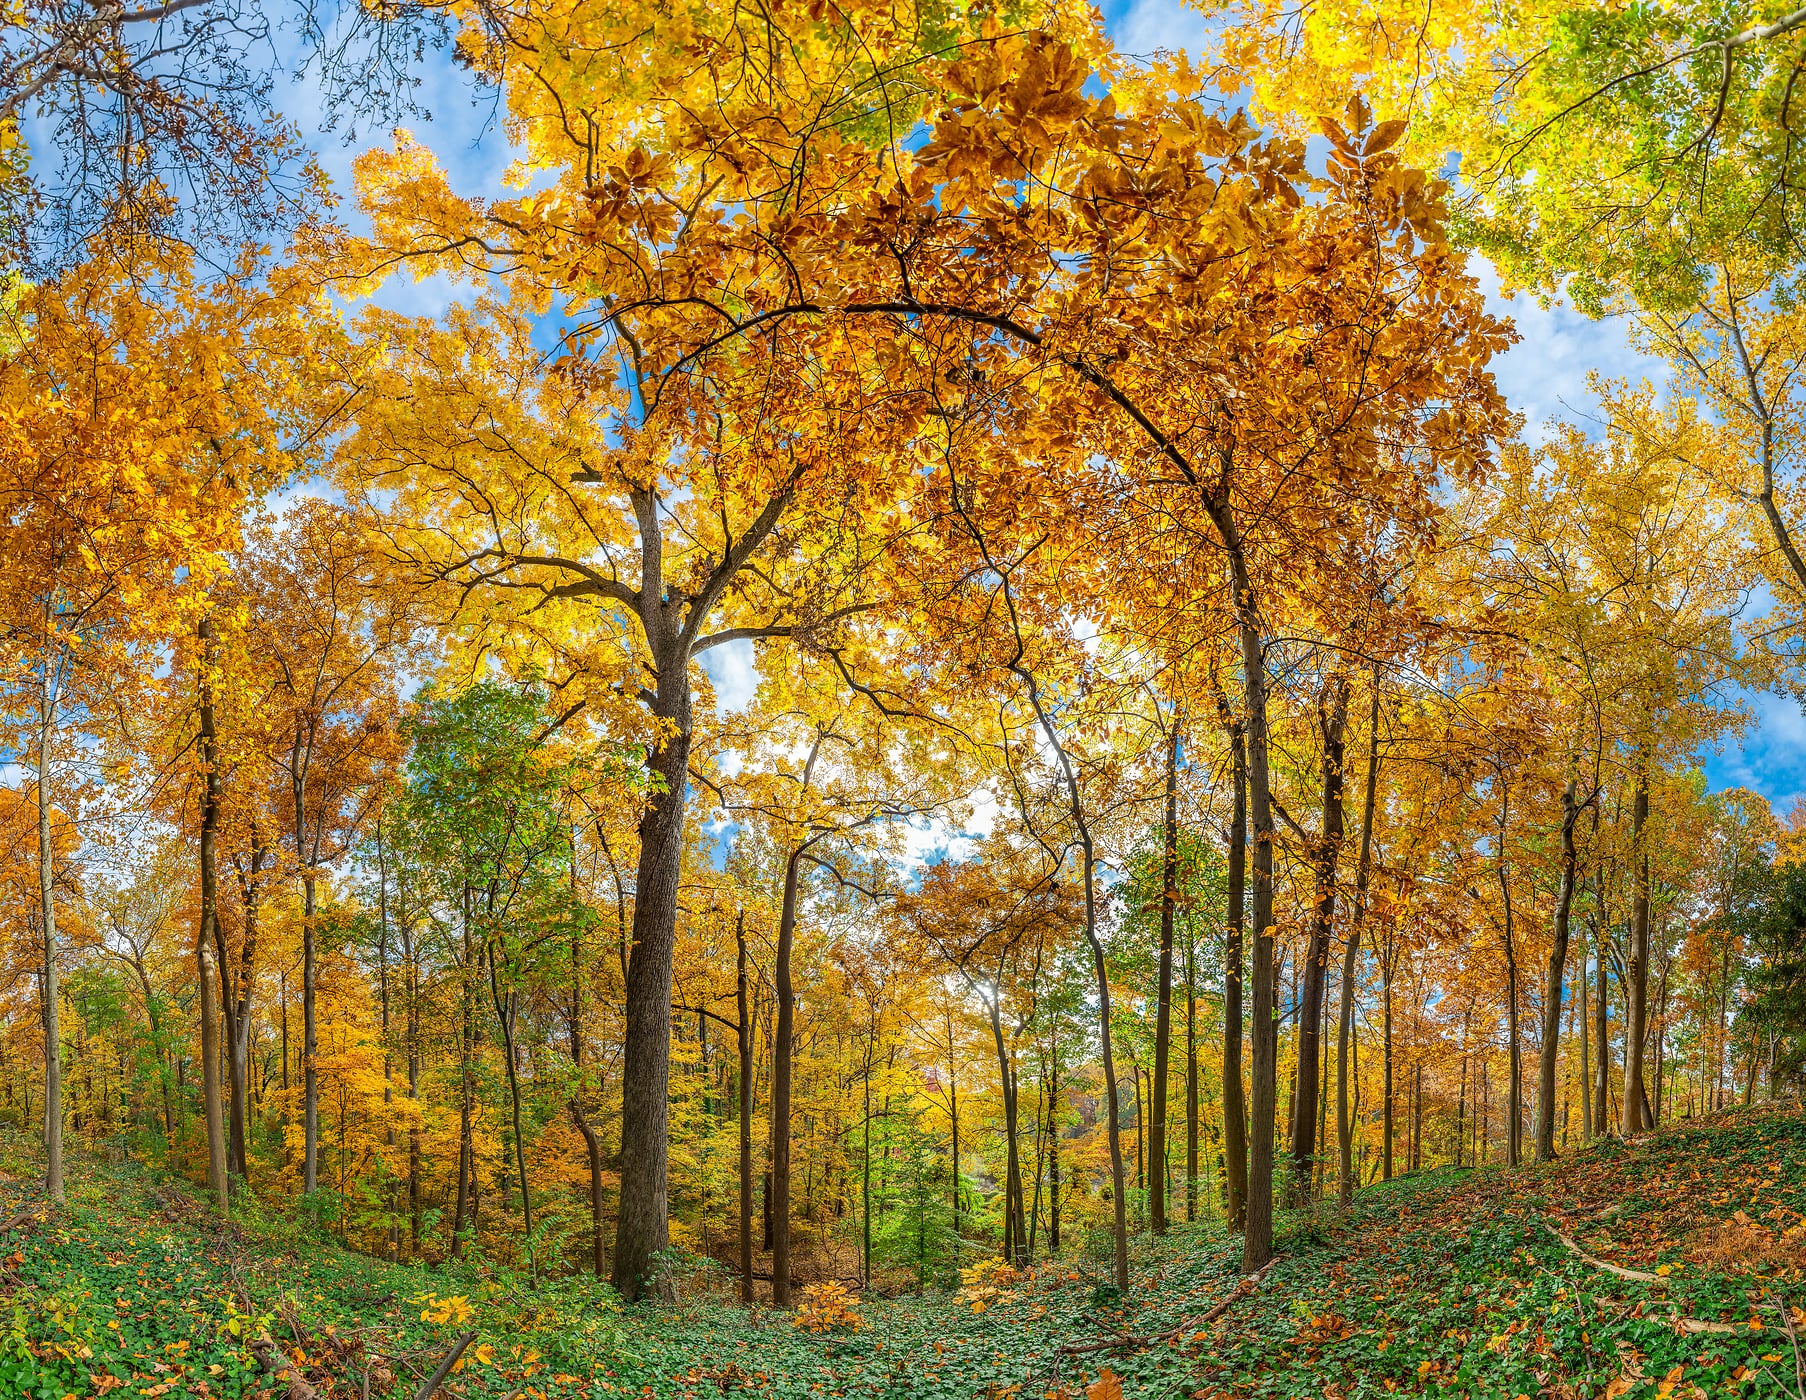 762 megapixels! A very high resolution, large-format VAST photo print of trees and fall foliage in a forest; autumn nature photograph created by Tim Lo Monaco in Arlington Forest Neighborhood, Arlington, Virginia